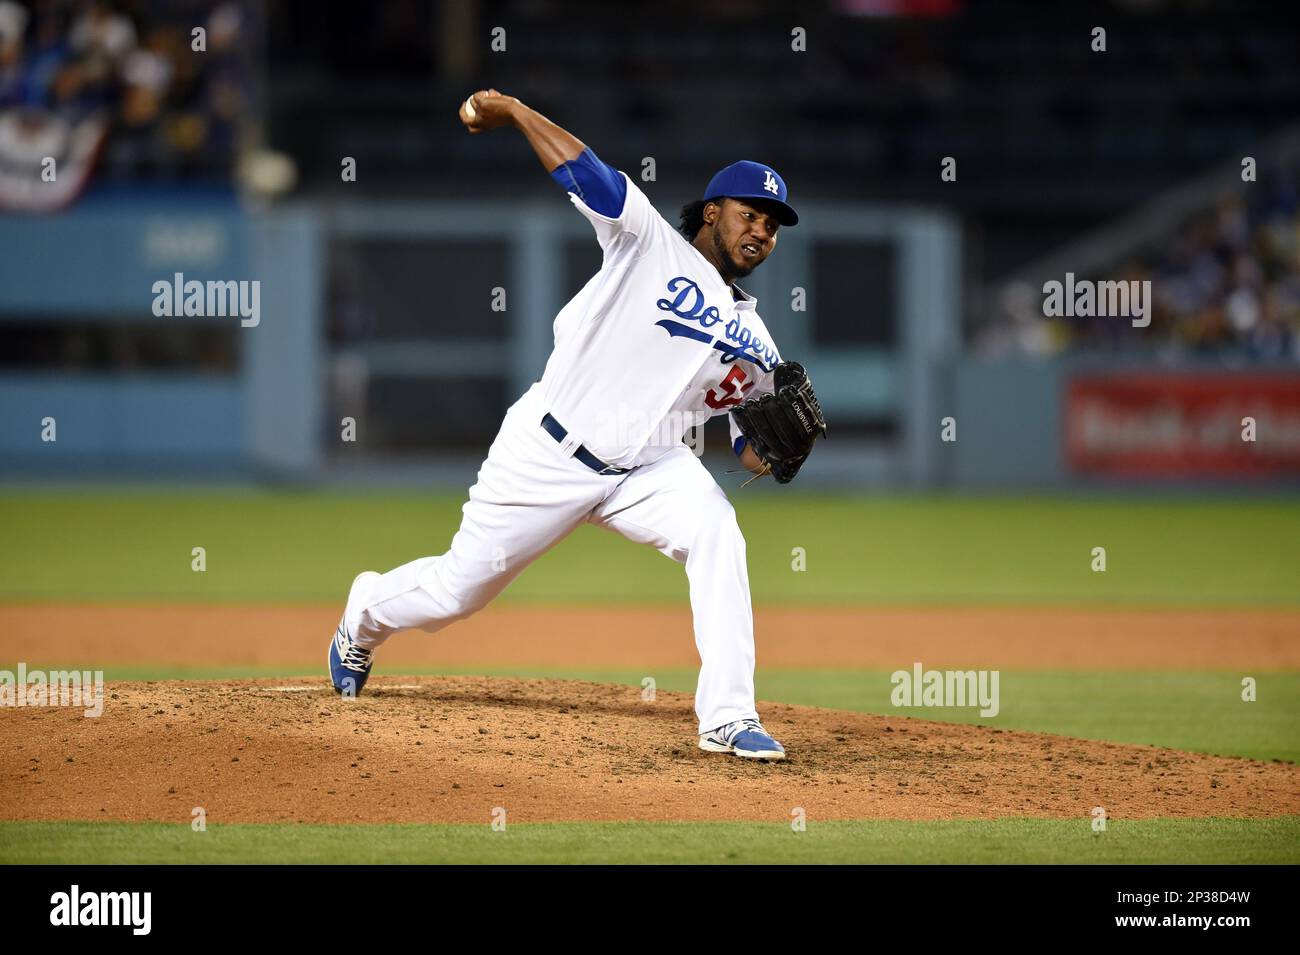 08 April 2015: Los Angeles Dodgers Pitcher Pedro Baez (52) [4014] during a  Major League Baseball game between the San Diego Padres and the Los Angeles  Dodgers at Dodger Stadium in Los